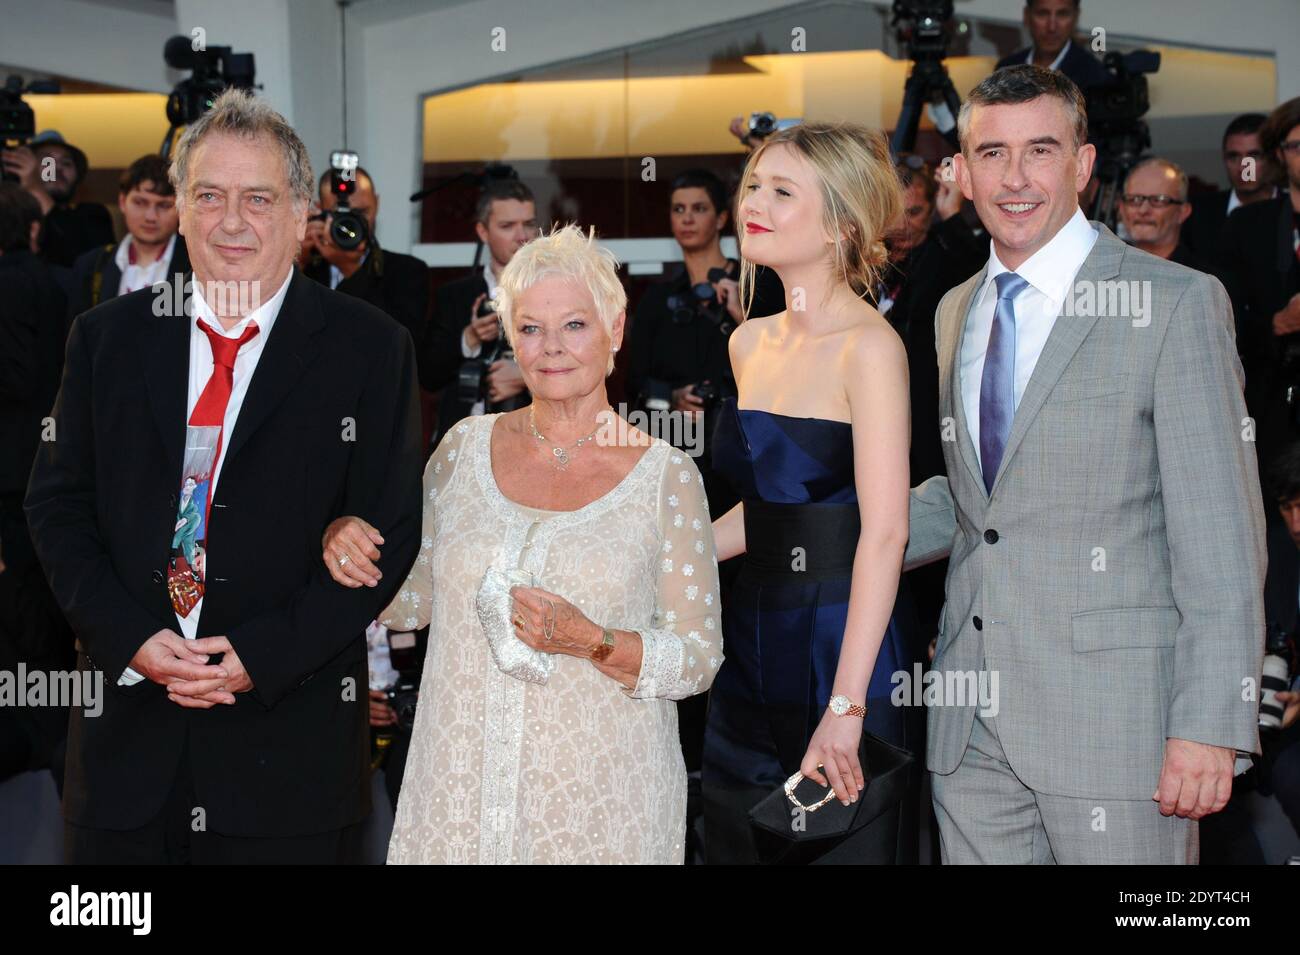 British director Stephen Frears, Judi Dench, Sophie Kennedy Clark and Steve Coogan attending the 'Philomena' Premiere during the 70th Venice International Film Festival (Mostra), at Lido island in Venice, Italy, on August 31, 2013. Photo by Aurore Marechal/ABACAPRESS.COM Stock Photo